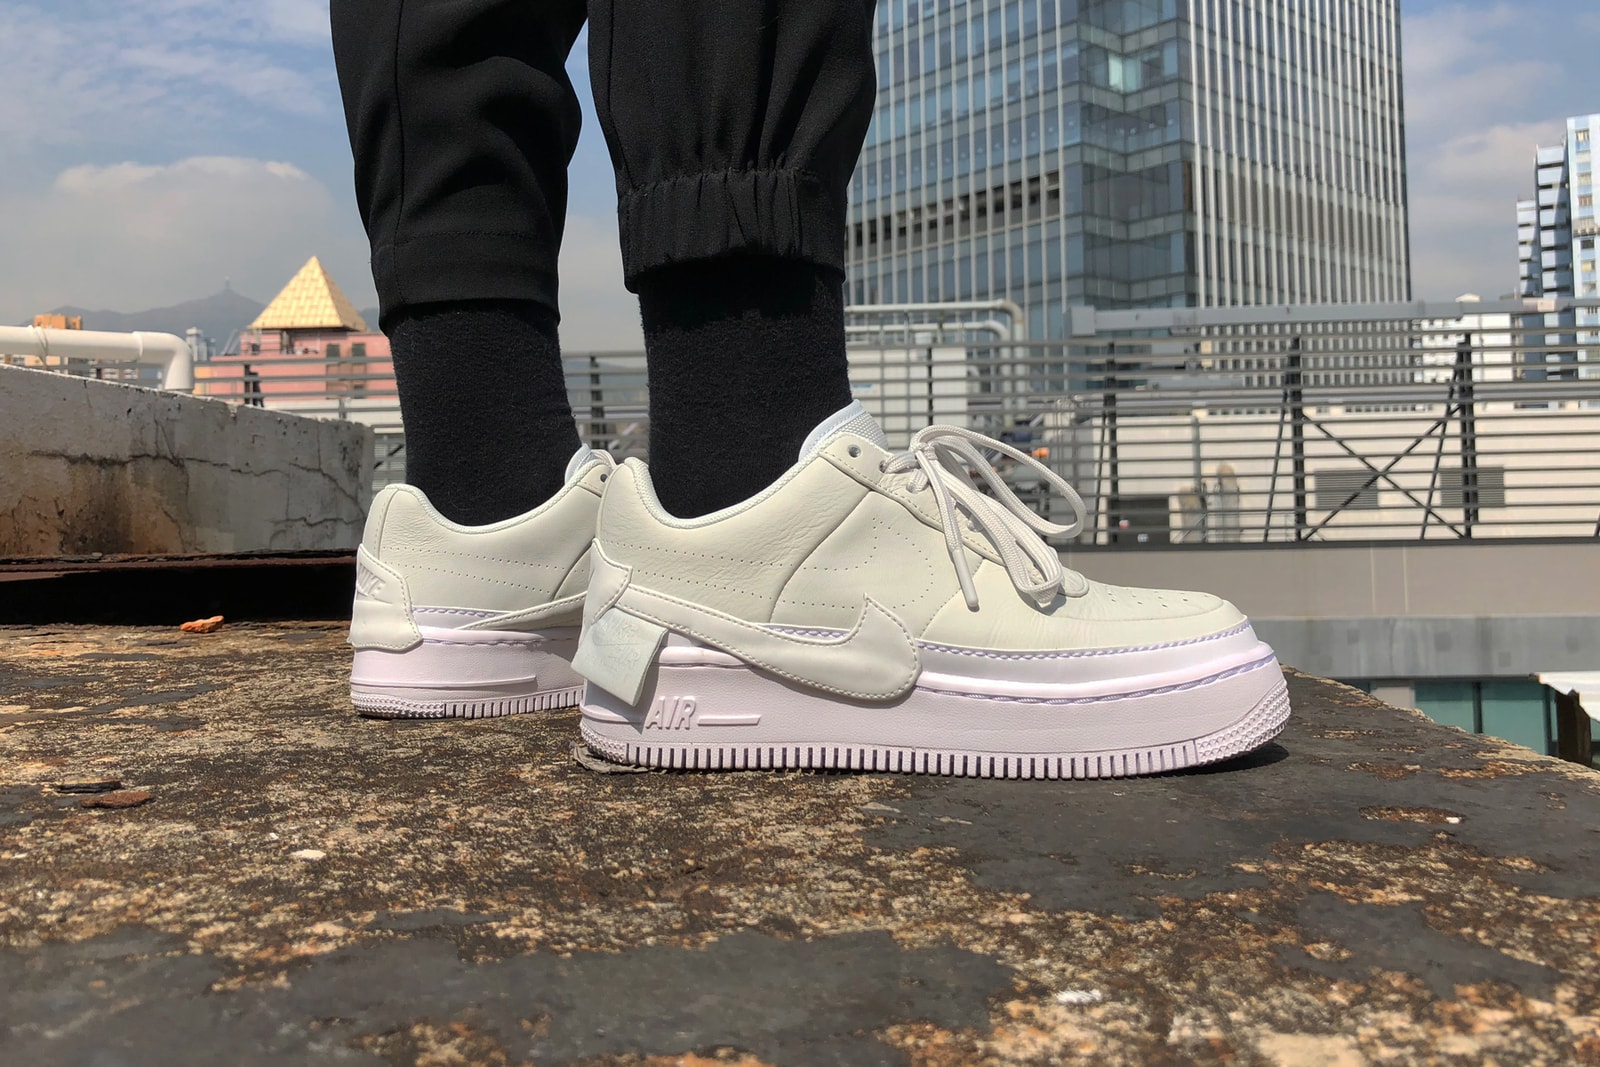 hypebaekicks review nike air force 1 jester xx the 1 reimagined pack